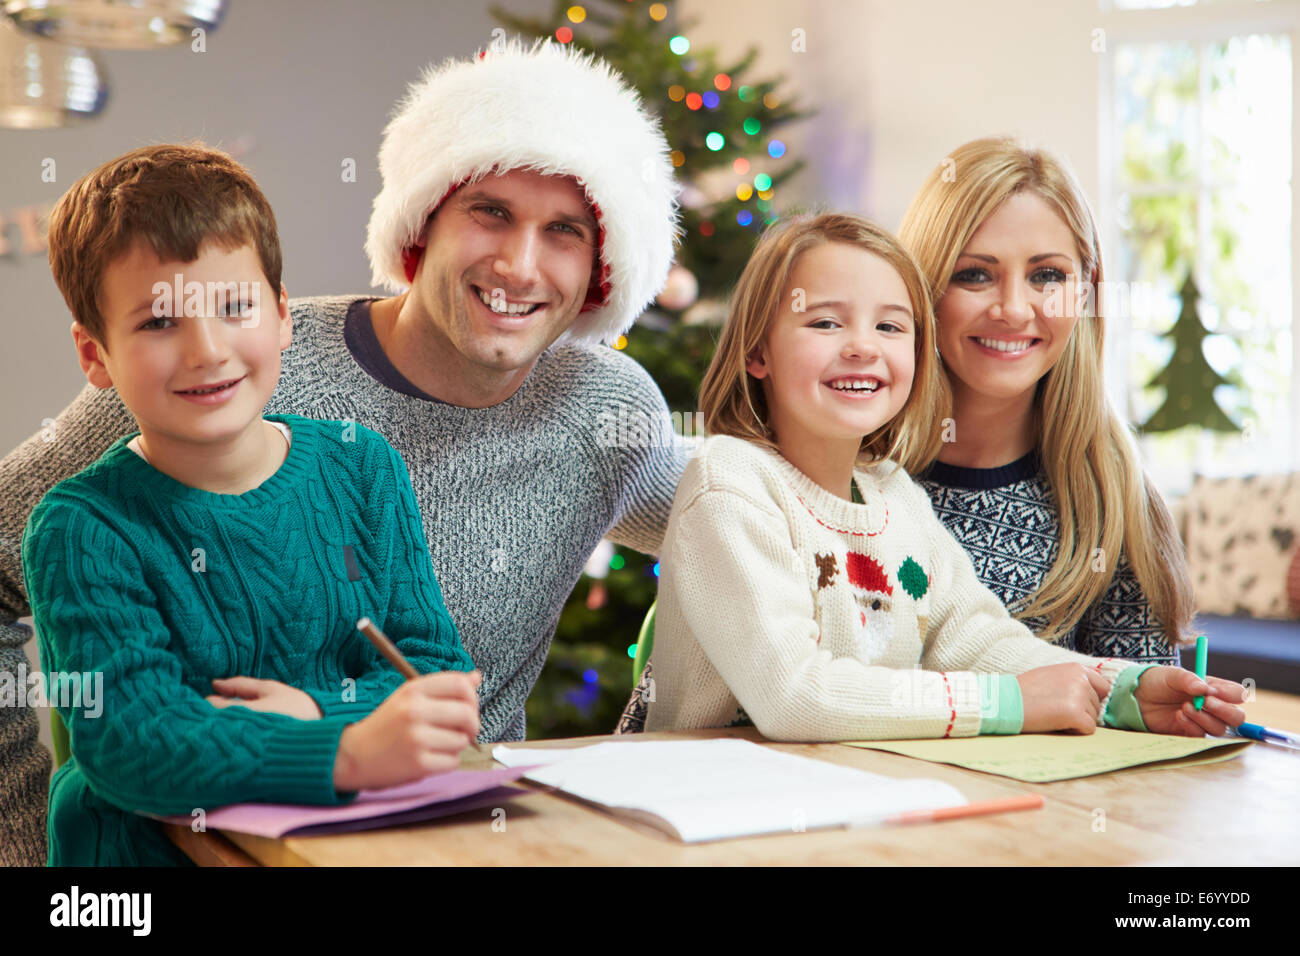 Family Writing Christmas Cards Together Stock Photo